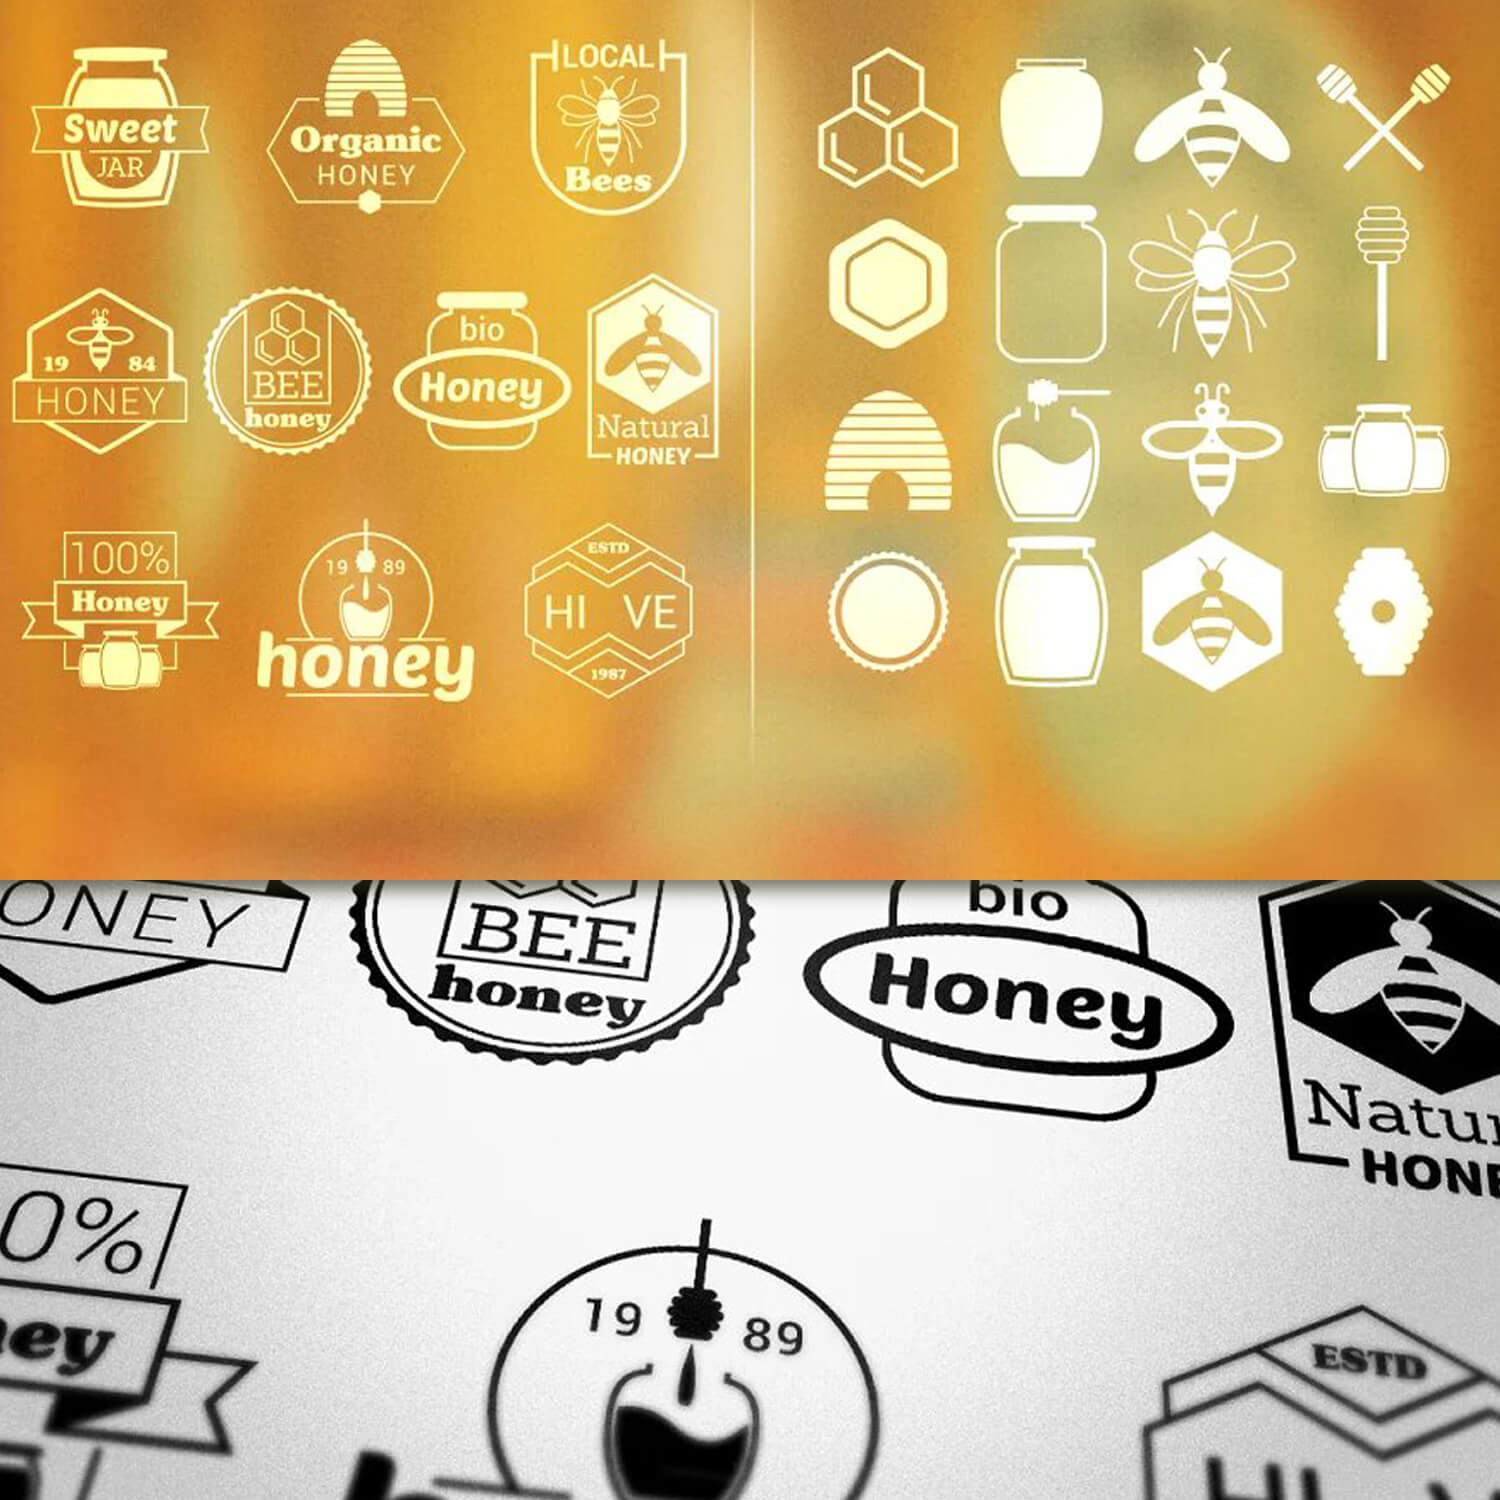 Sweet organic honey logos in black on a white background or in light beige on an orange background.